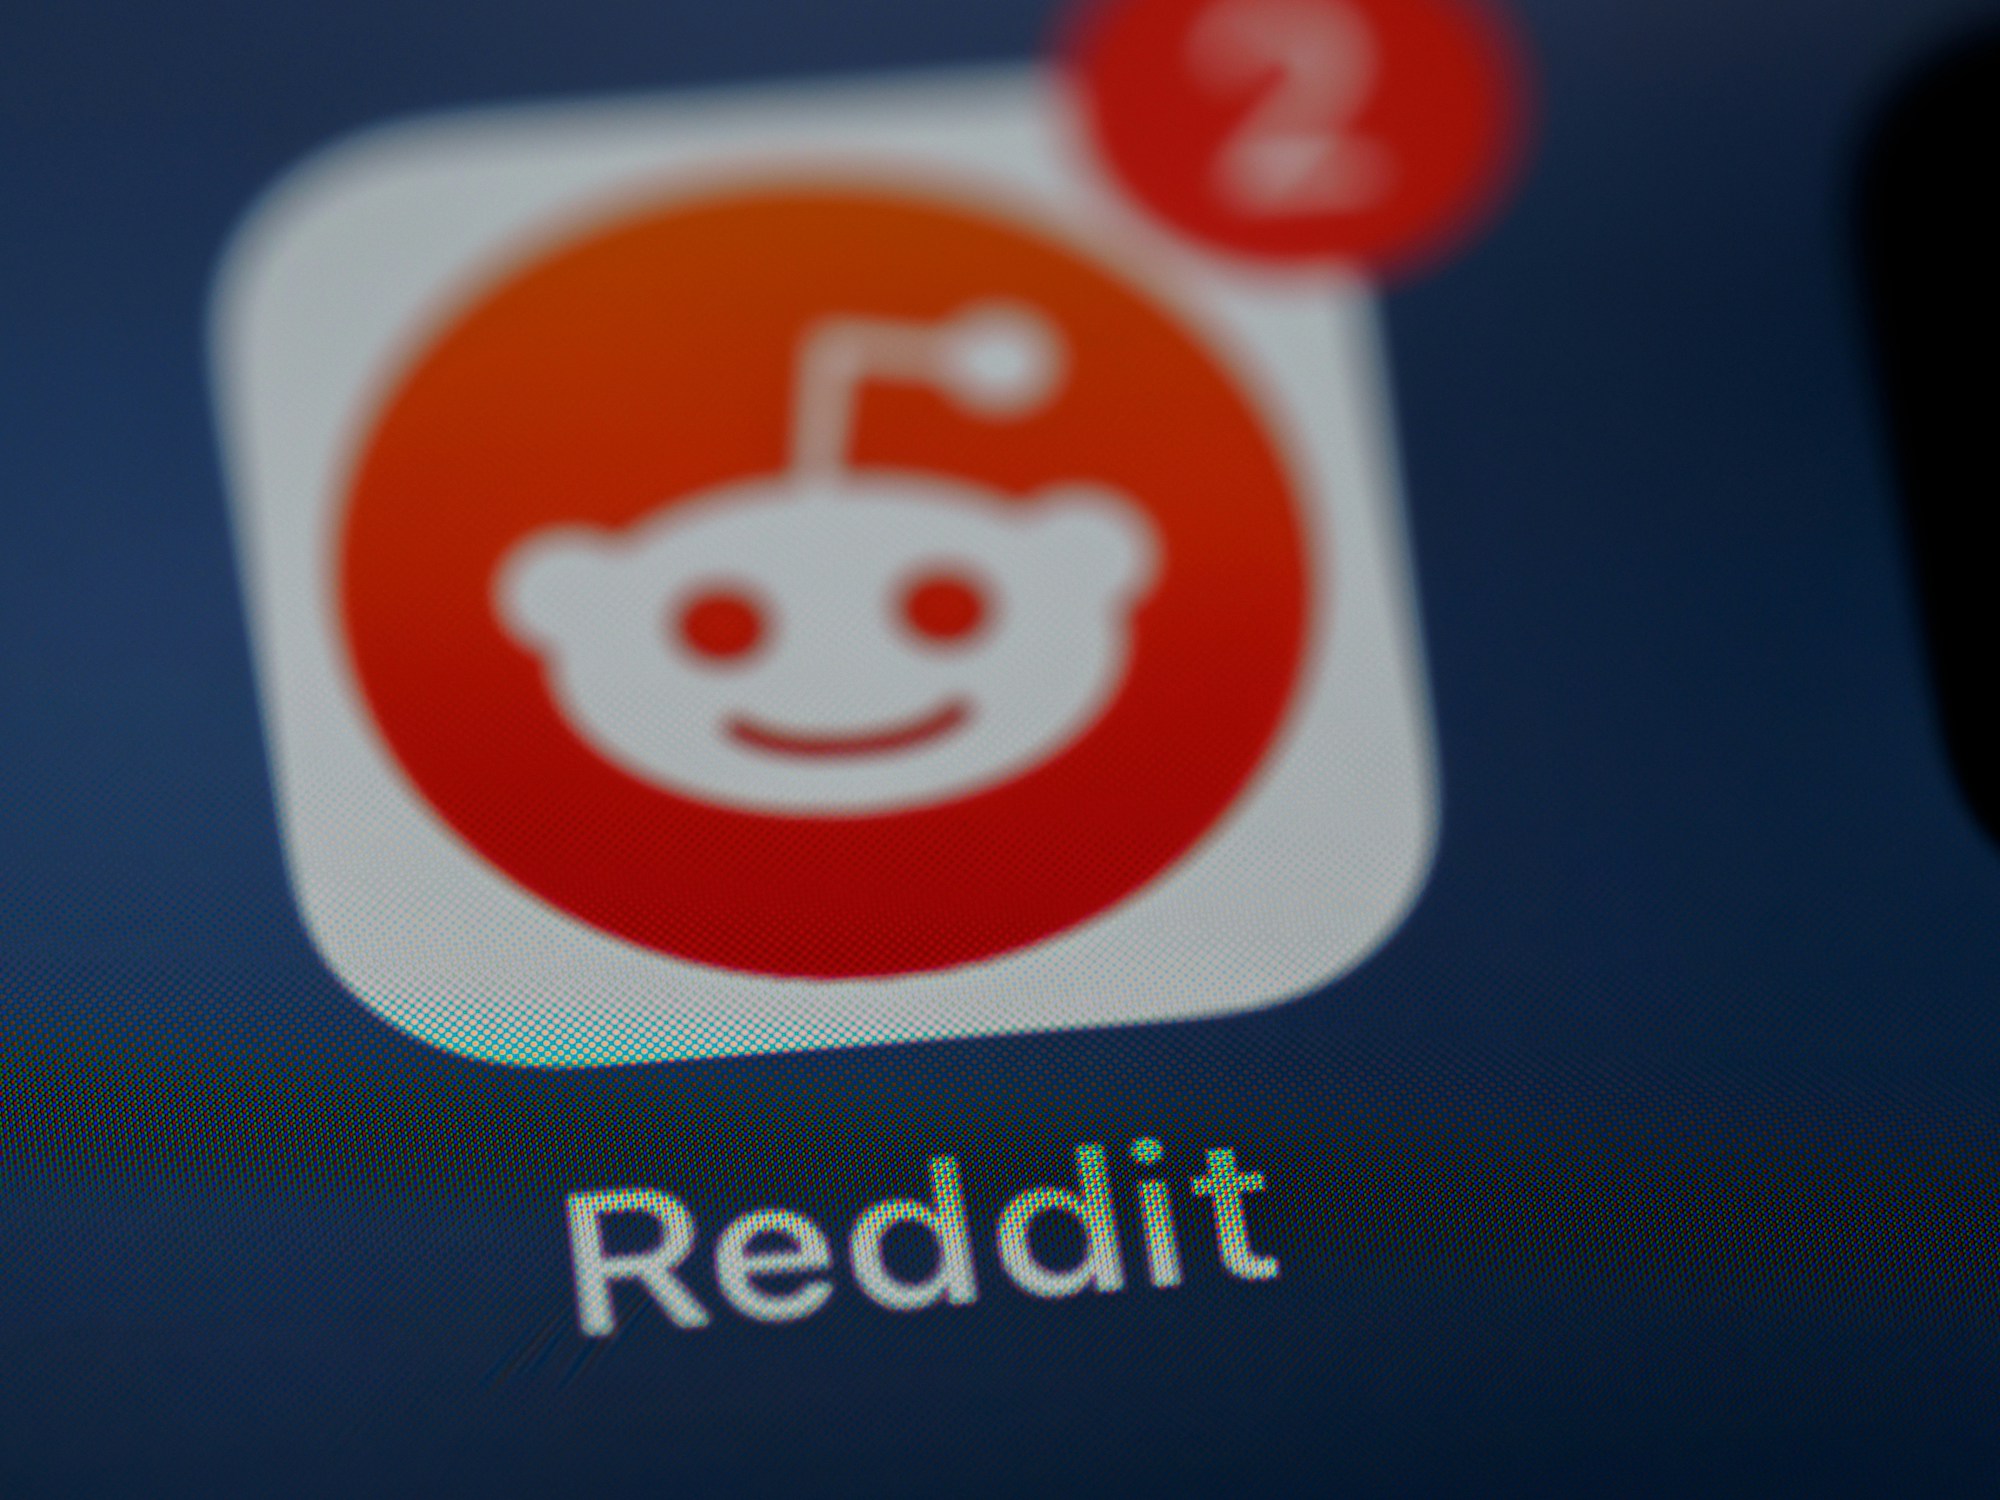 Wonderinterest | We will finally see it! Reddit's anticipated IPO is knocking on the door